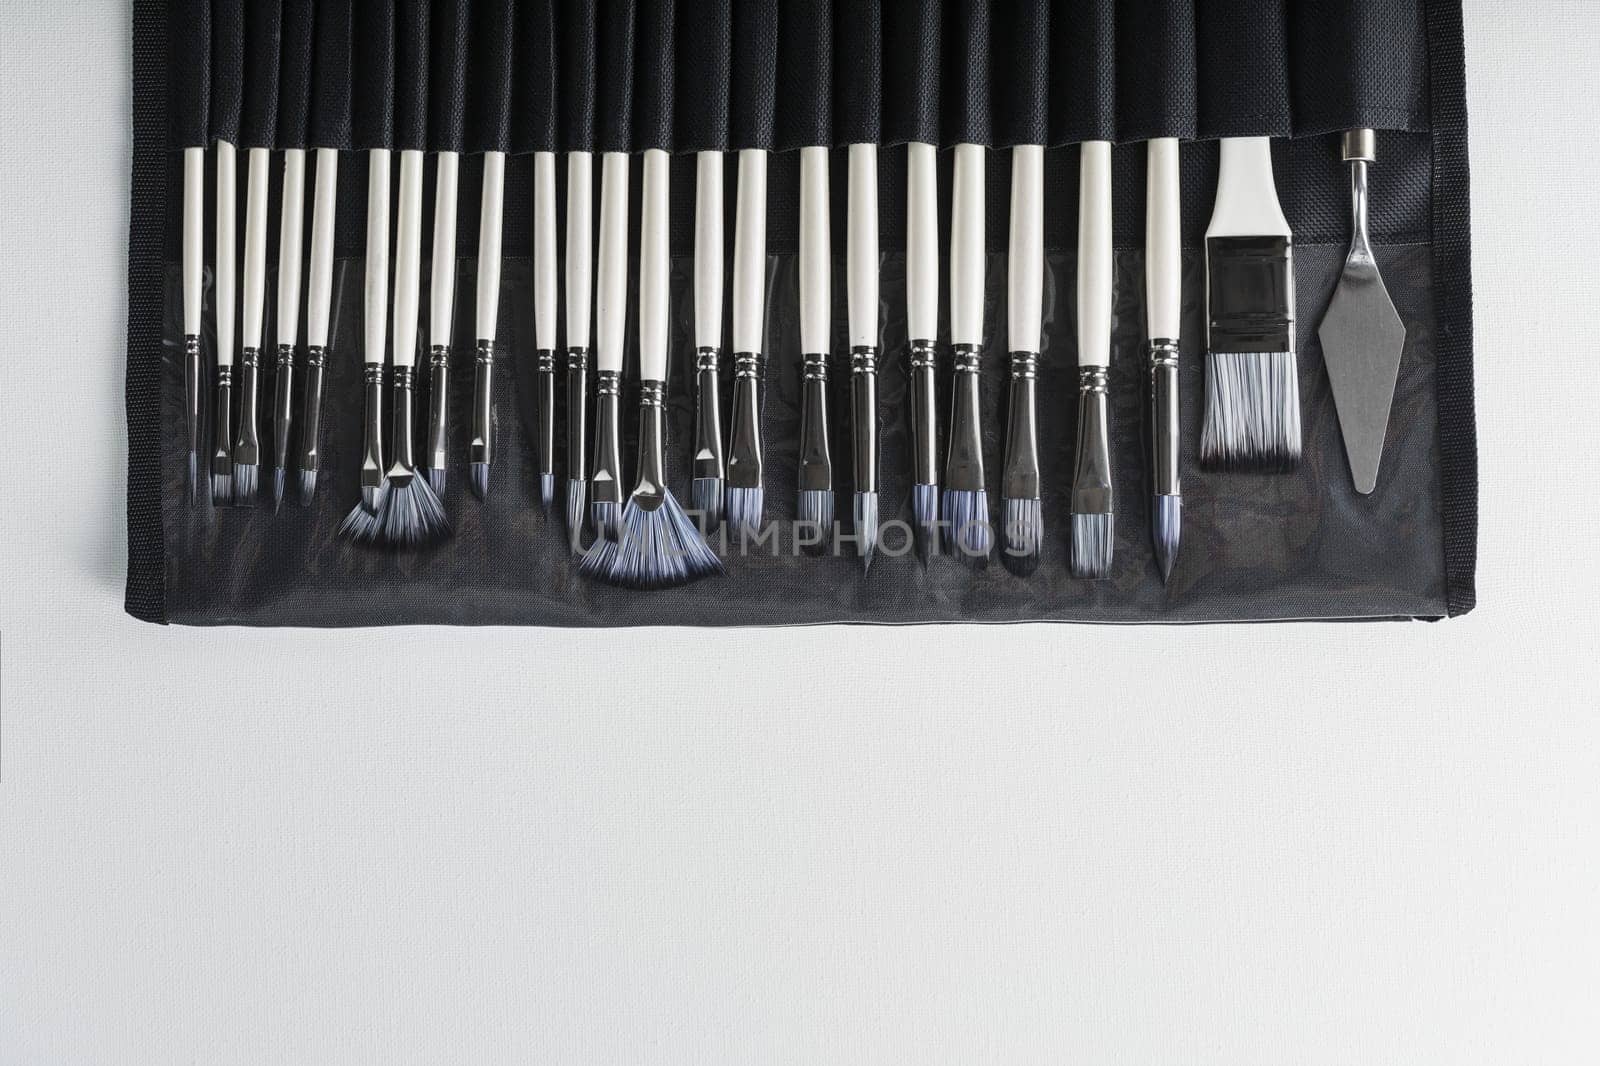 A set of art brushes for drawing on a white background, top view with free space